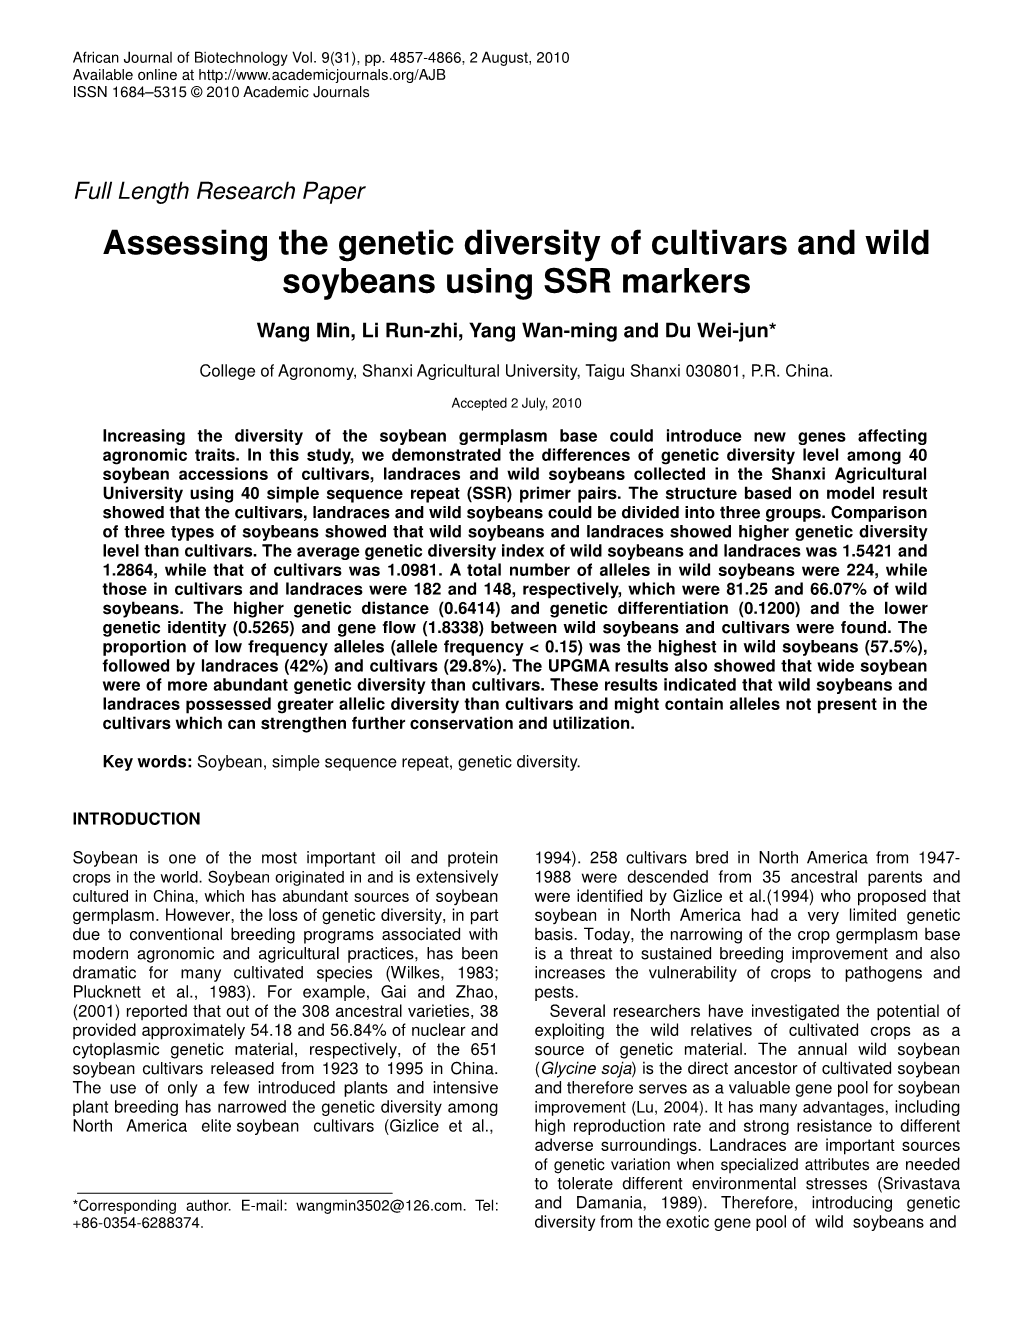 Assessing the Genetic Diversity of Cultivars and Wild Soybeans Using SSR Markers